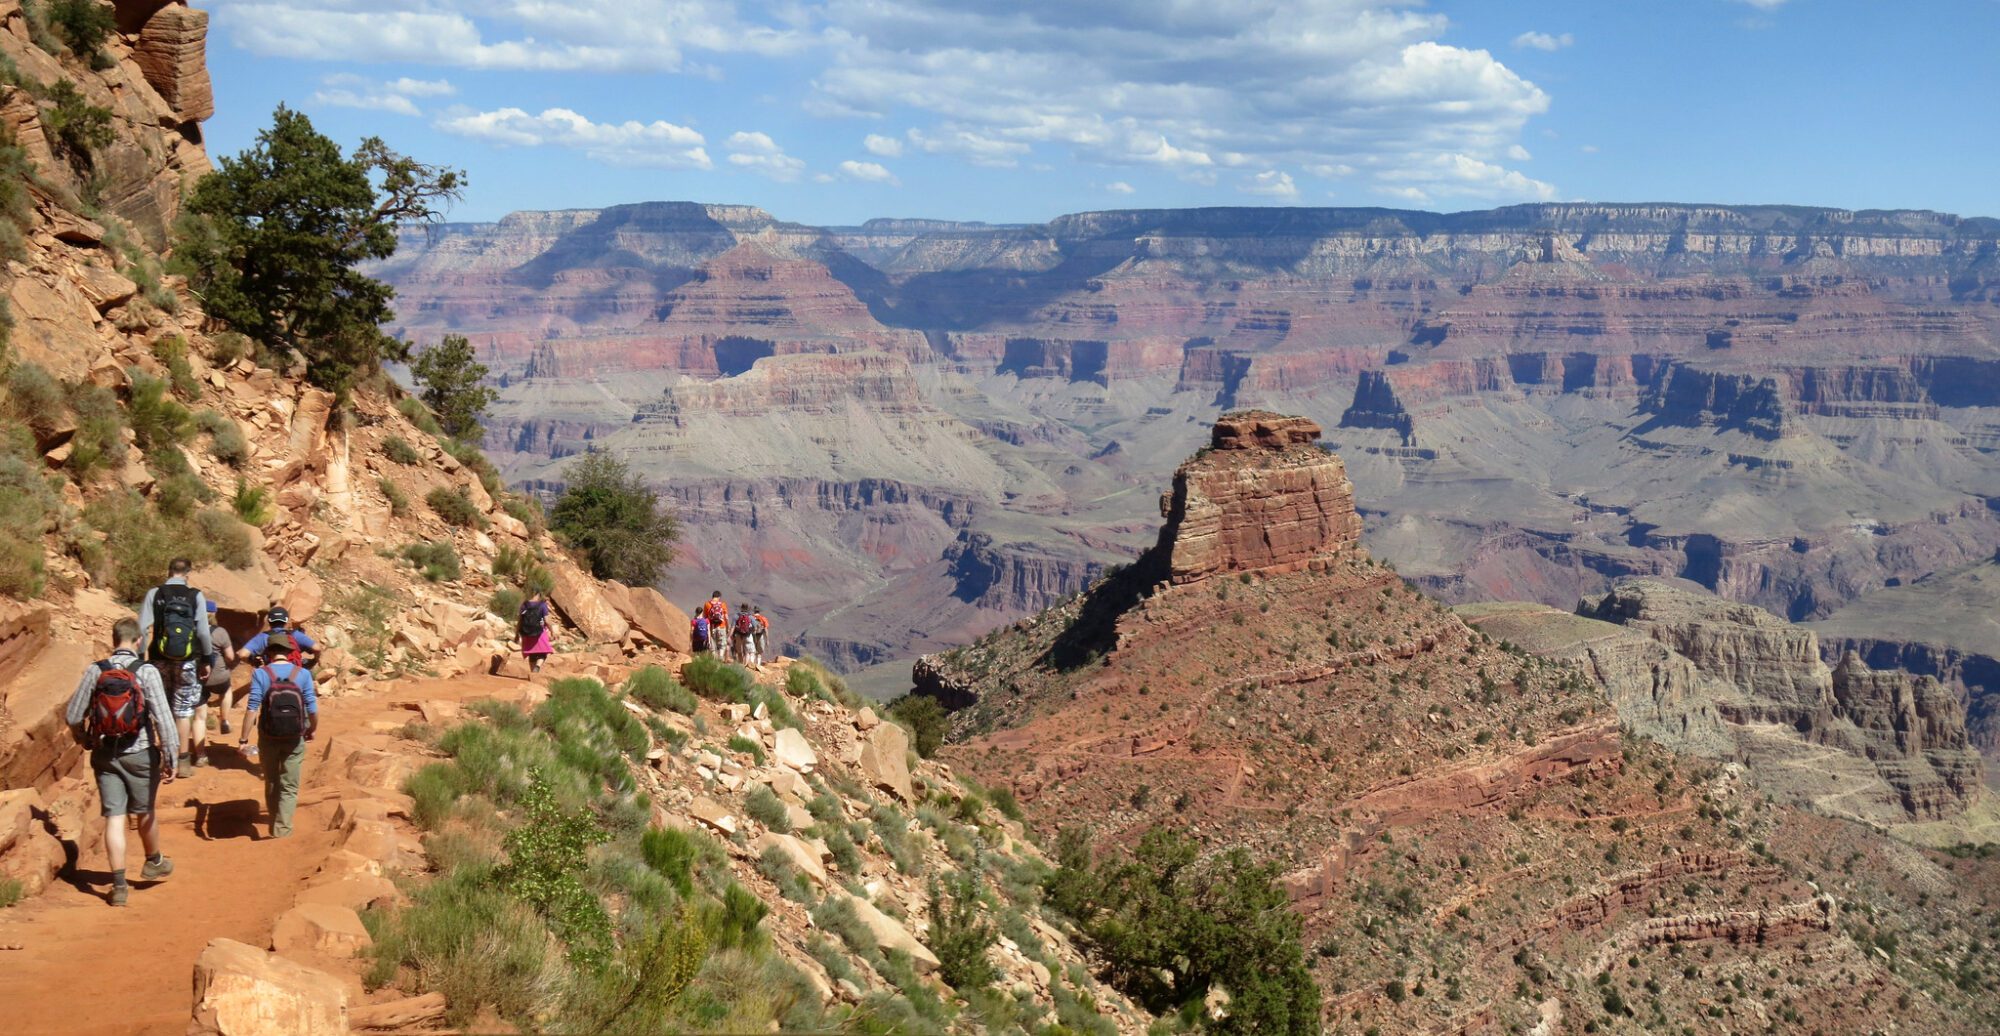 Hikers on the Grand Canyon